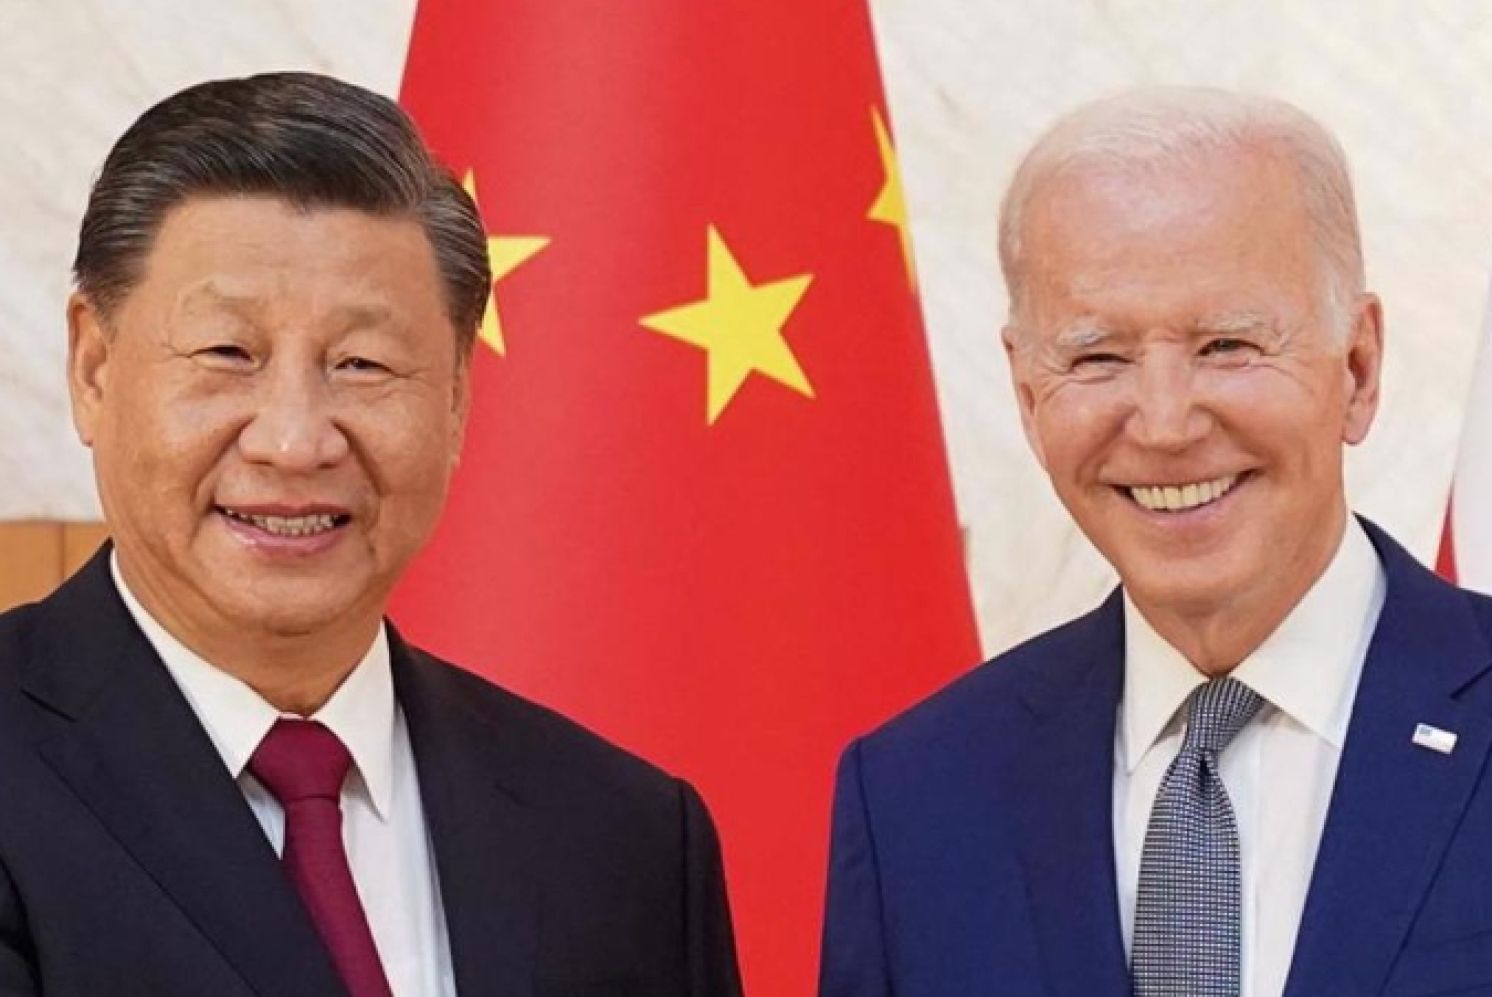 Lai Needs to Grasp Significance of Biden-Xi Call